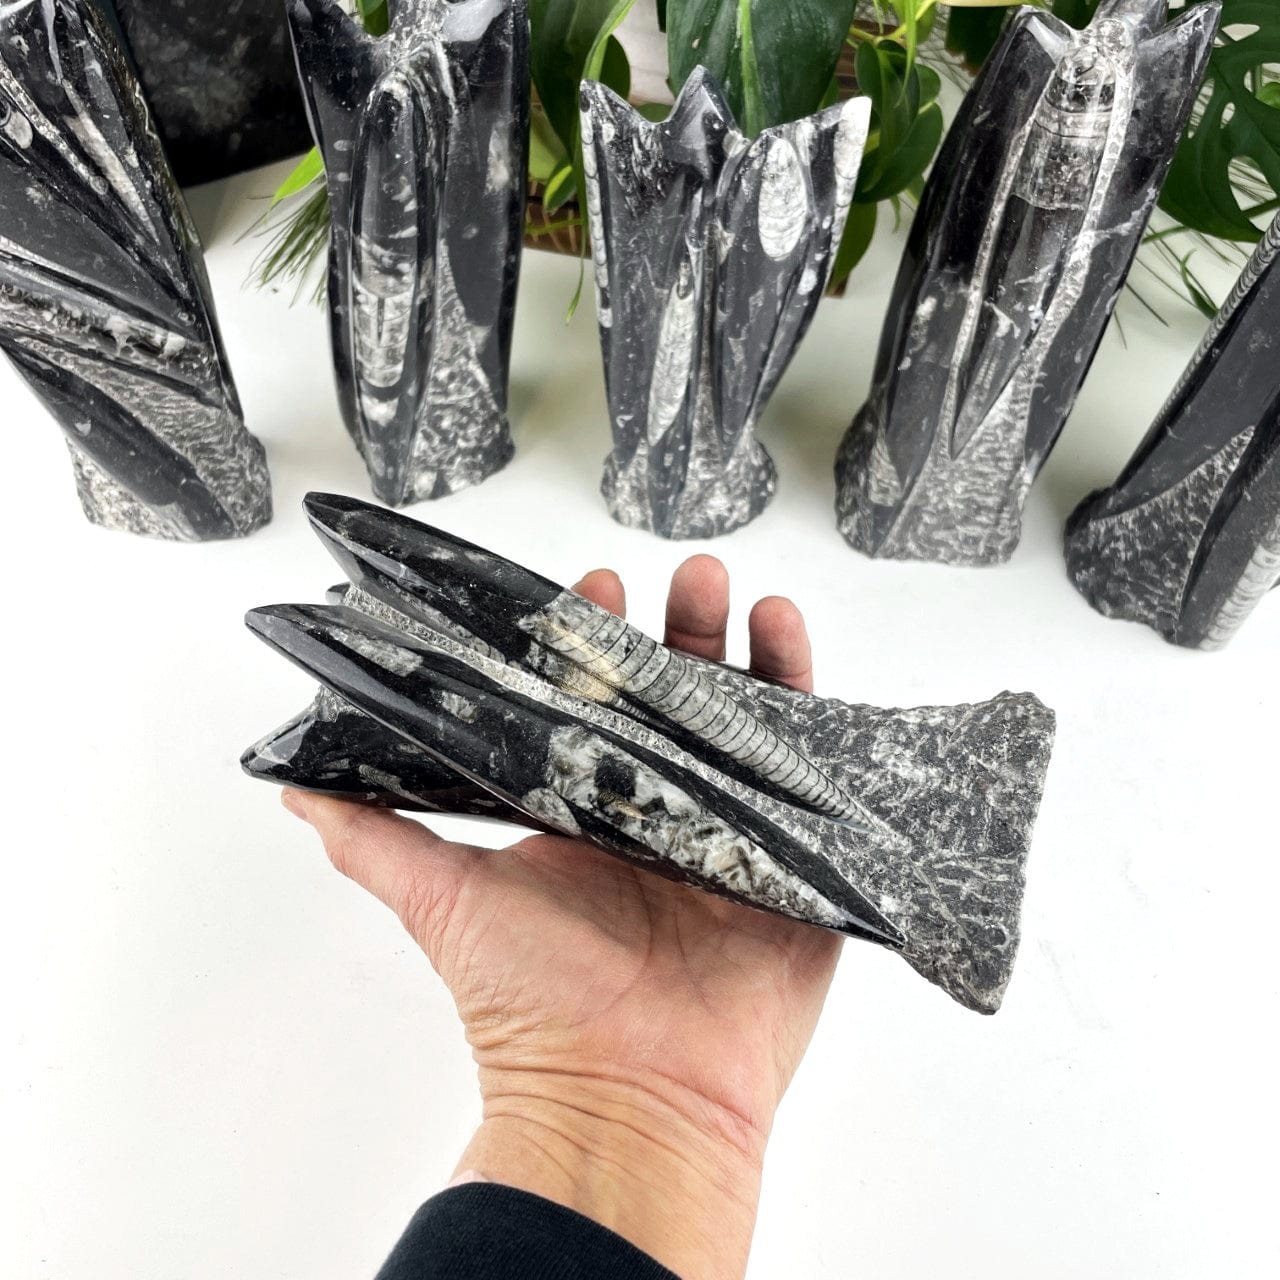 Orthoceras Fossil Towers with one in a hand showing size range and fossils